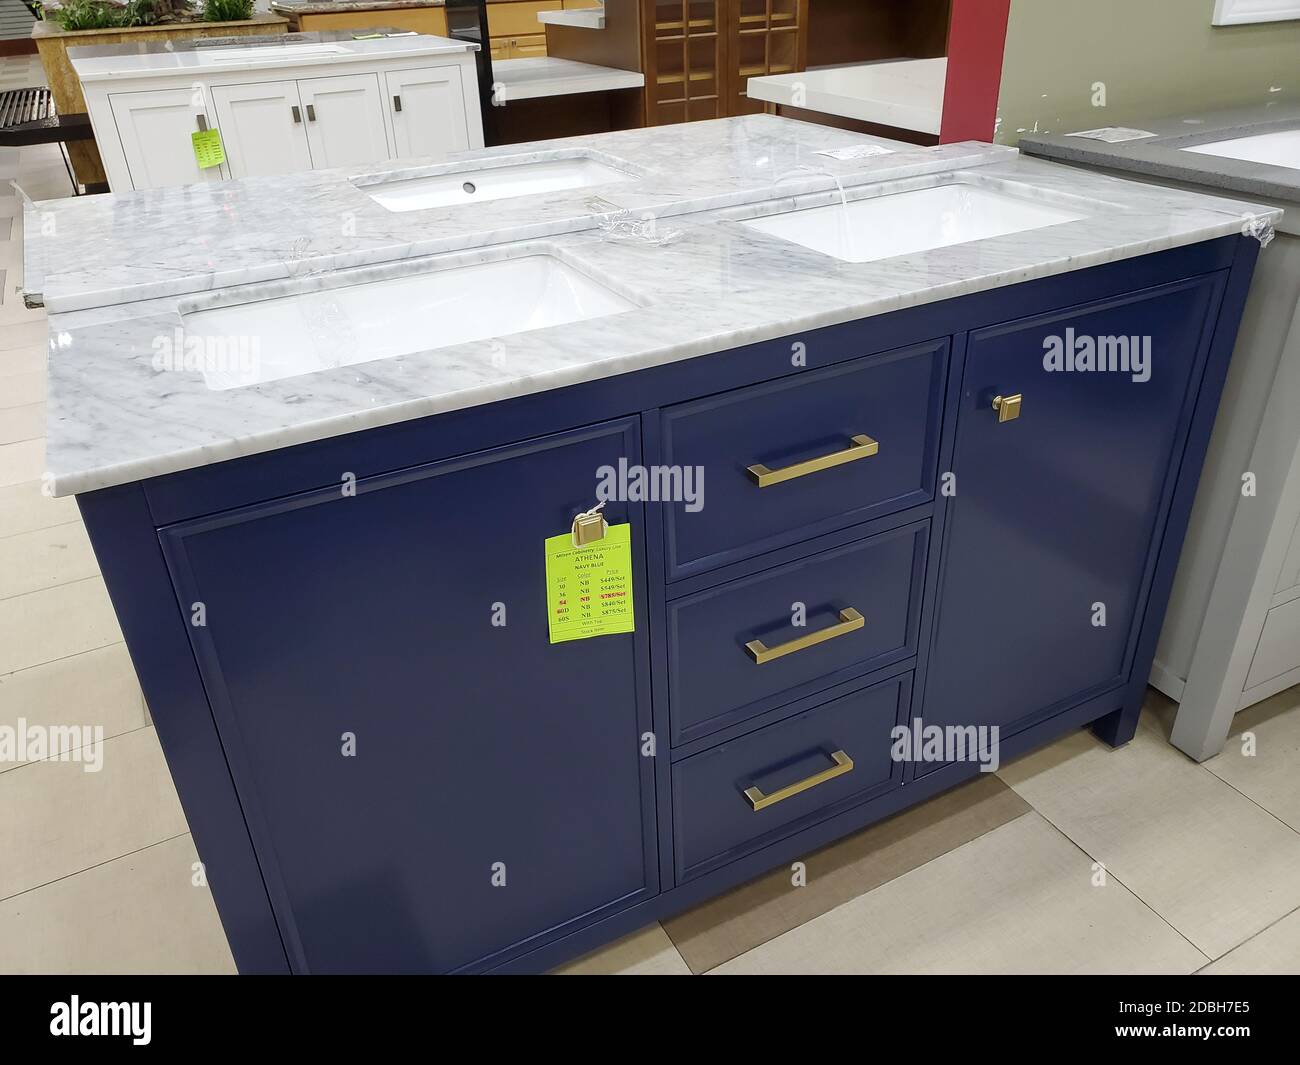 Black double-sink bathroom vanity with a white marble top in Emeryville, California, USA, November 9, 2020. () Stock Photo